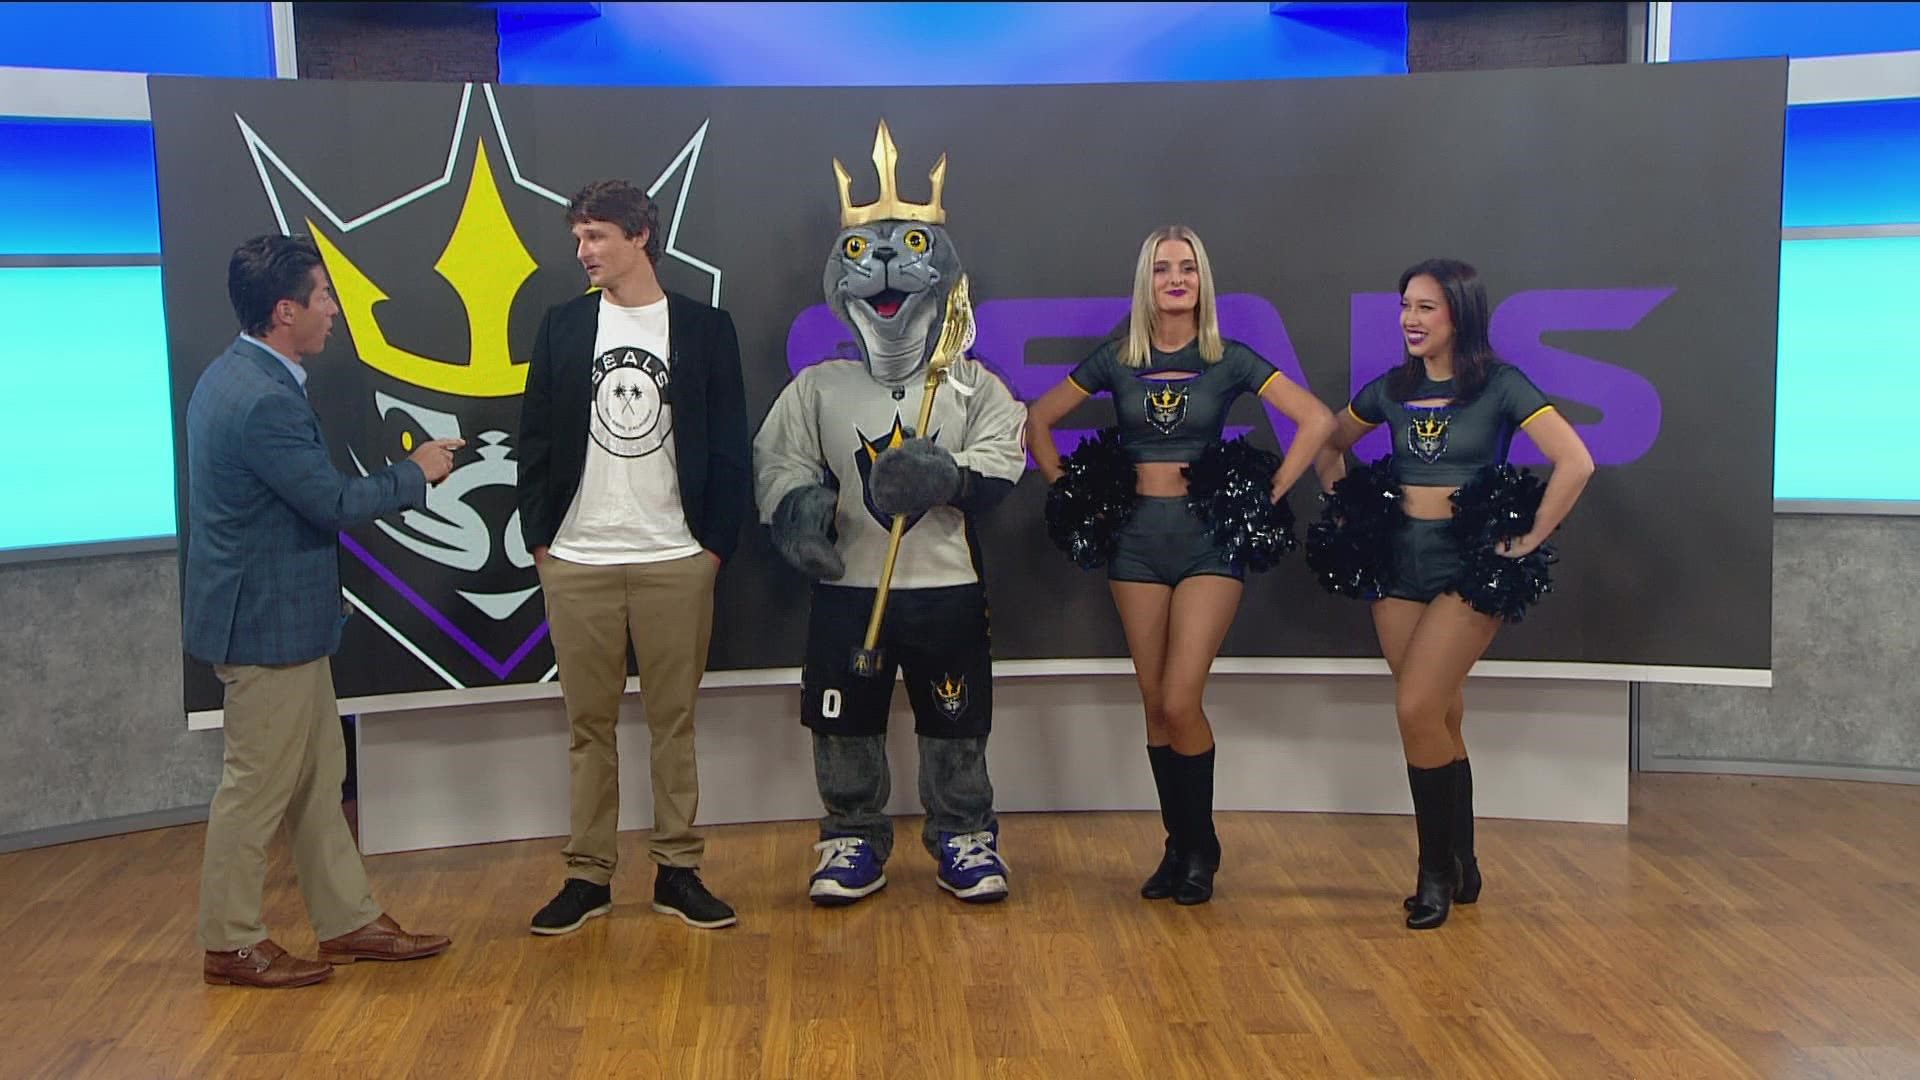 Dan Funk, the mascot Salty and the Sirens Dance Squad talked about the first game of the season, how the team feels and what viewers can expect.